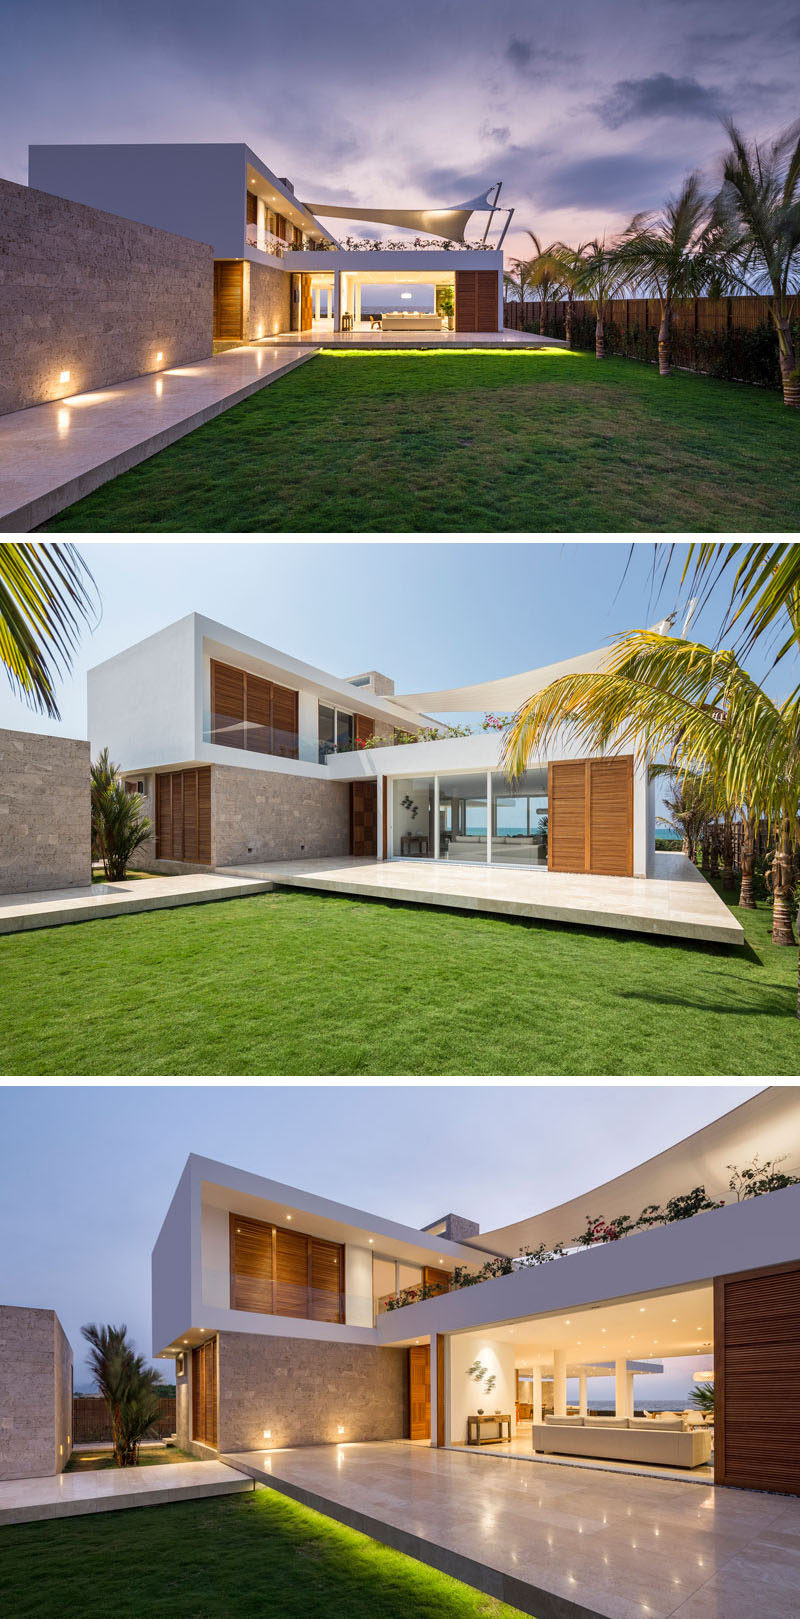 This modern beach house has a stone walkway that brings you to the front of the home where you can enter through the front door or the sliding patio doors. The patio can be enclosed by glass doors, and for extra security when the home owners are away and to protect the interior from the sun, wood brise-soleils covers slide over the glass doors.